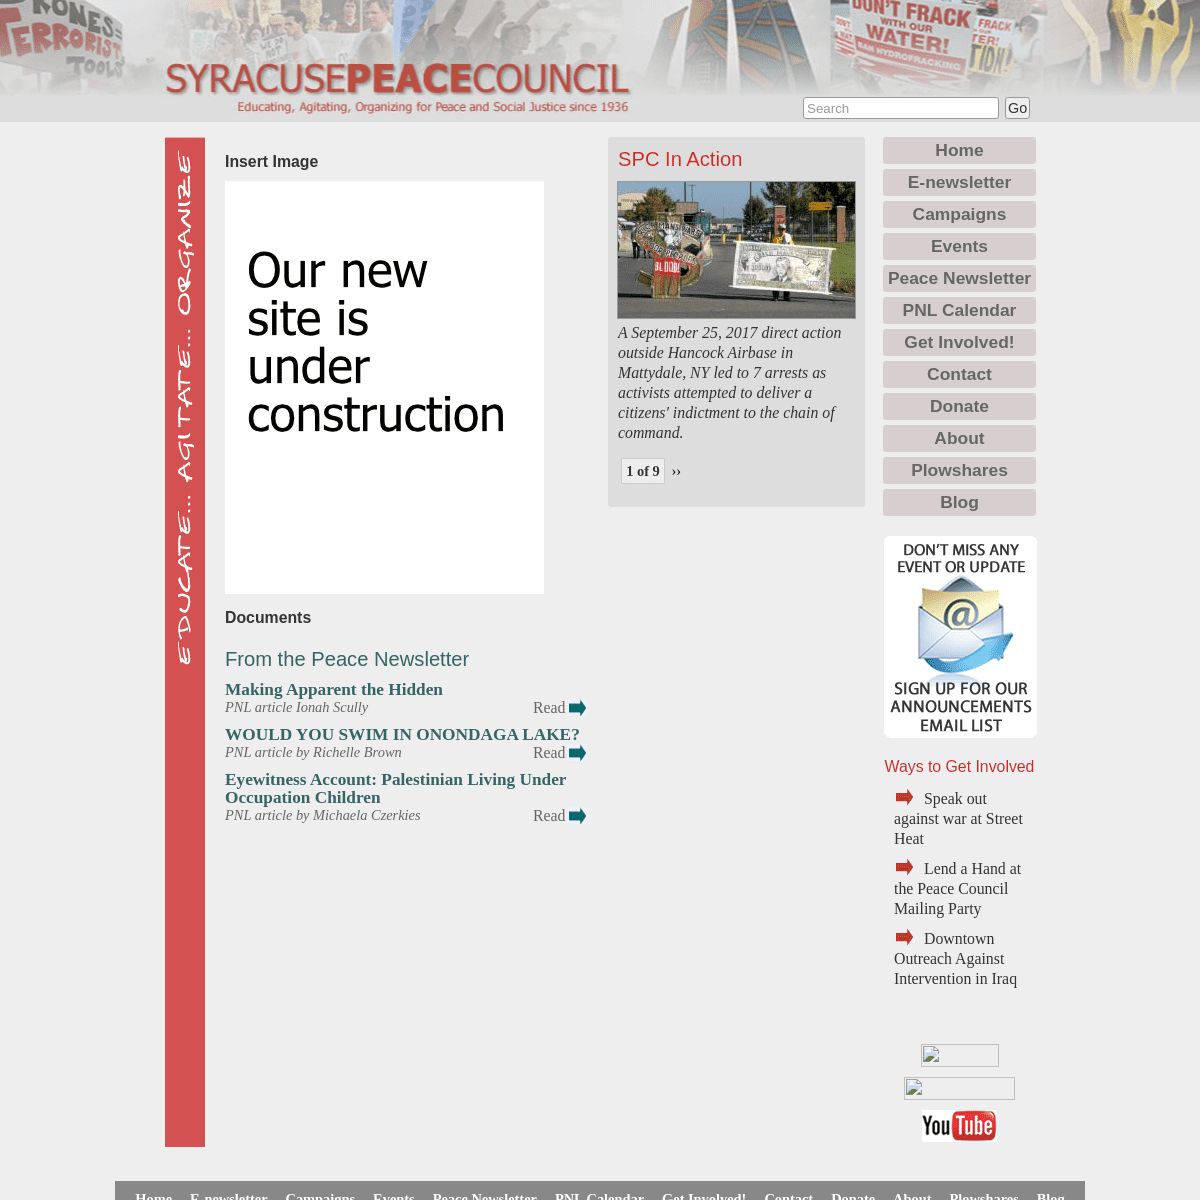 A complete backup of https://peacecouncil.net